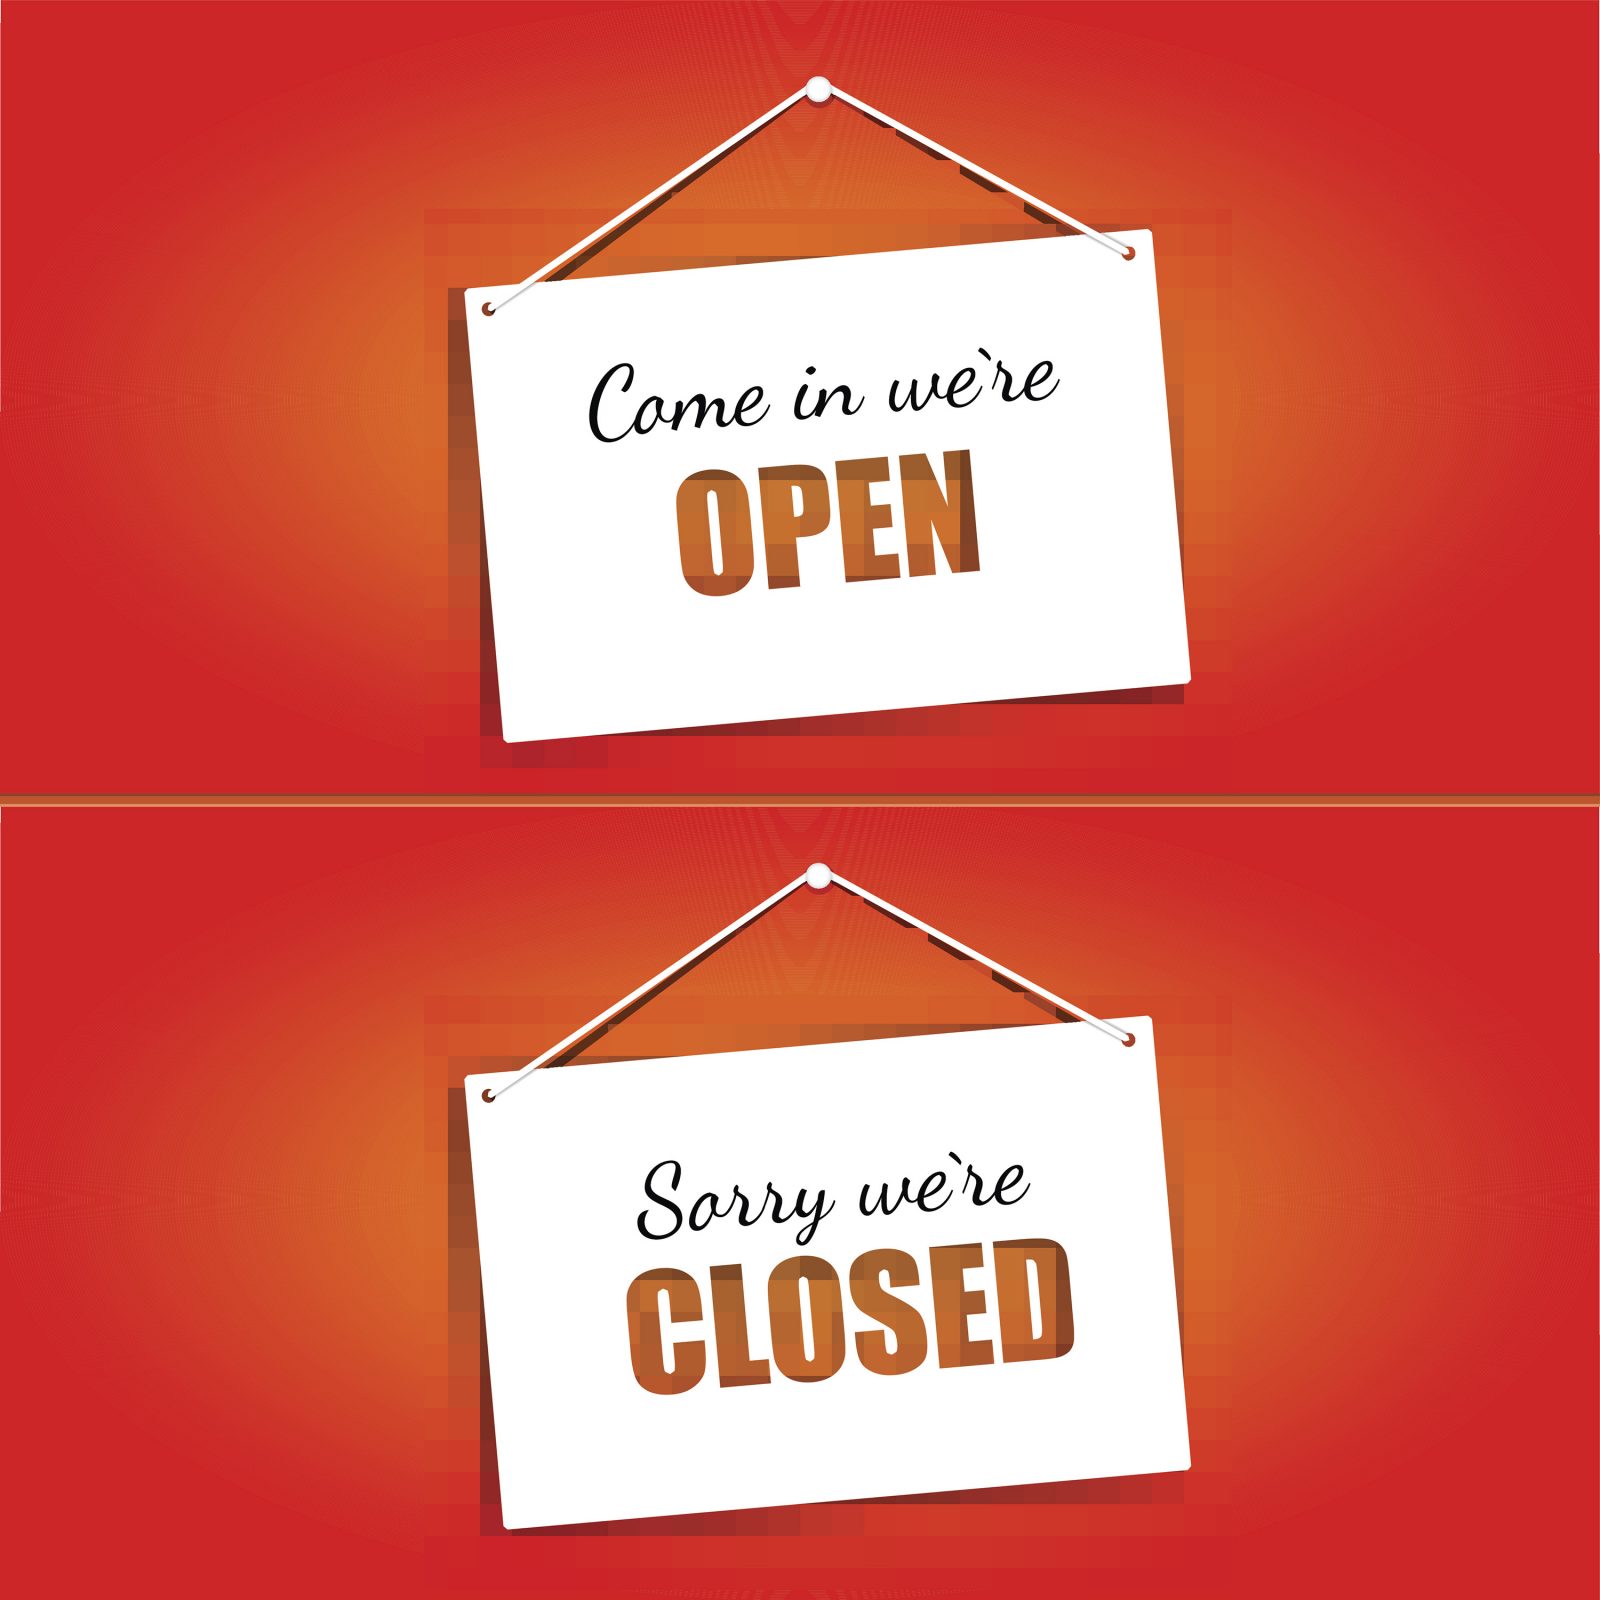 Open and closed signs in red letters on white hanging signs against a red background